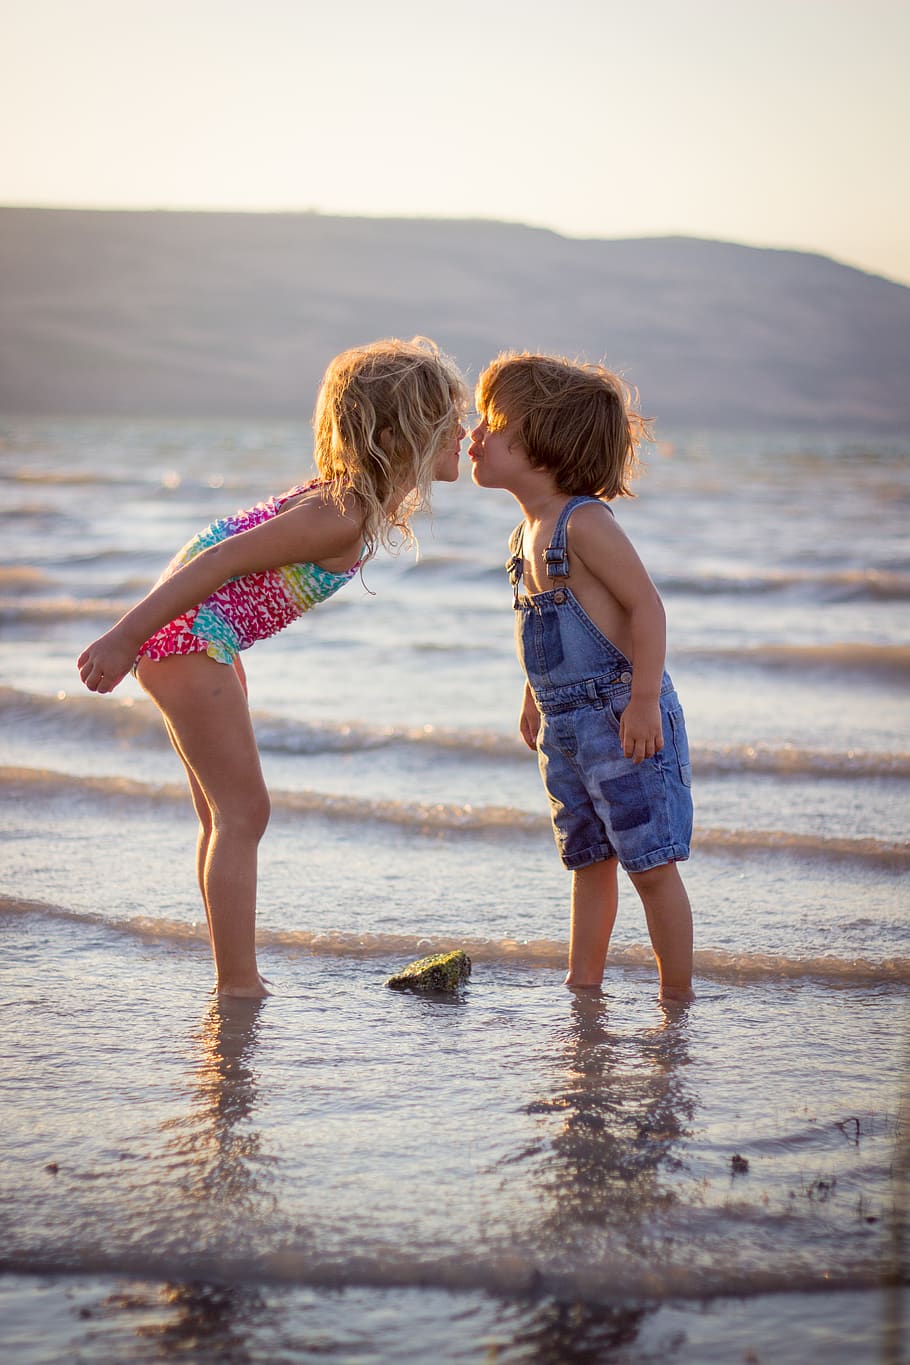 HD wallpaper: girl and boy kissing on beach during daytime, water,  childhood | Wallpaper Flare